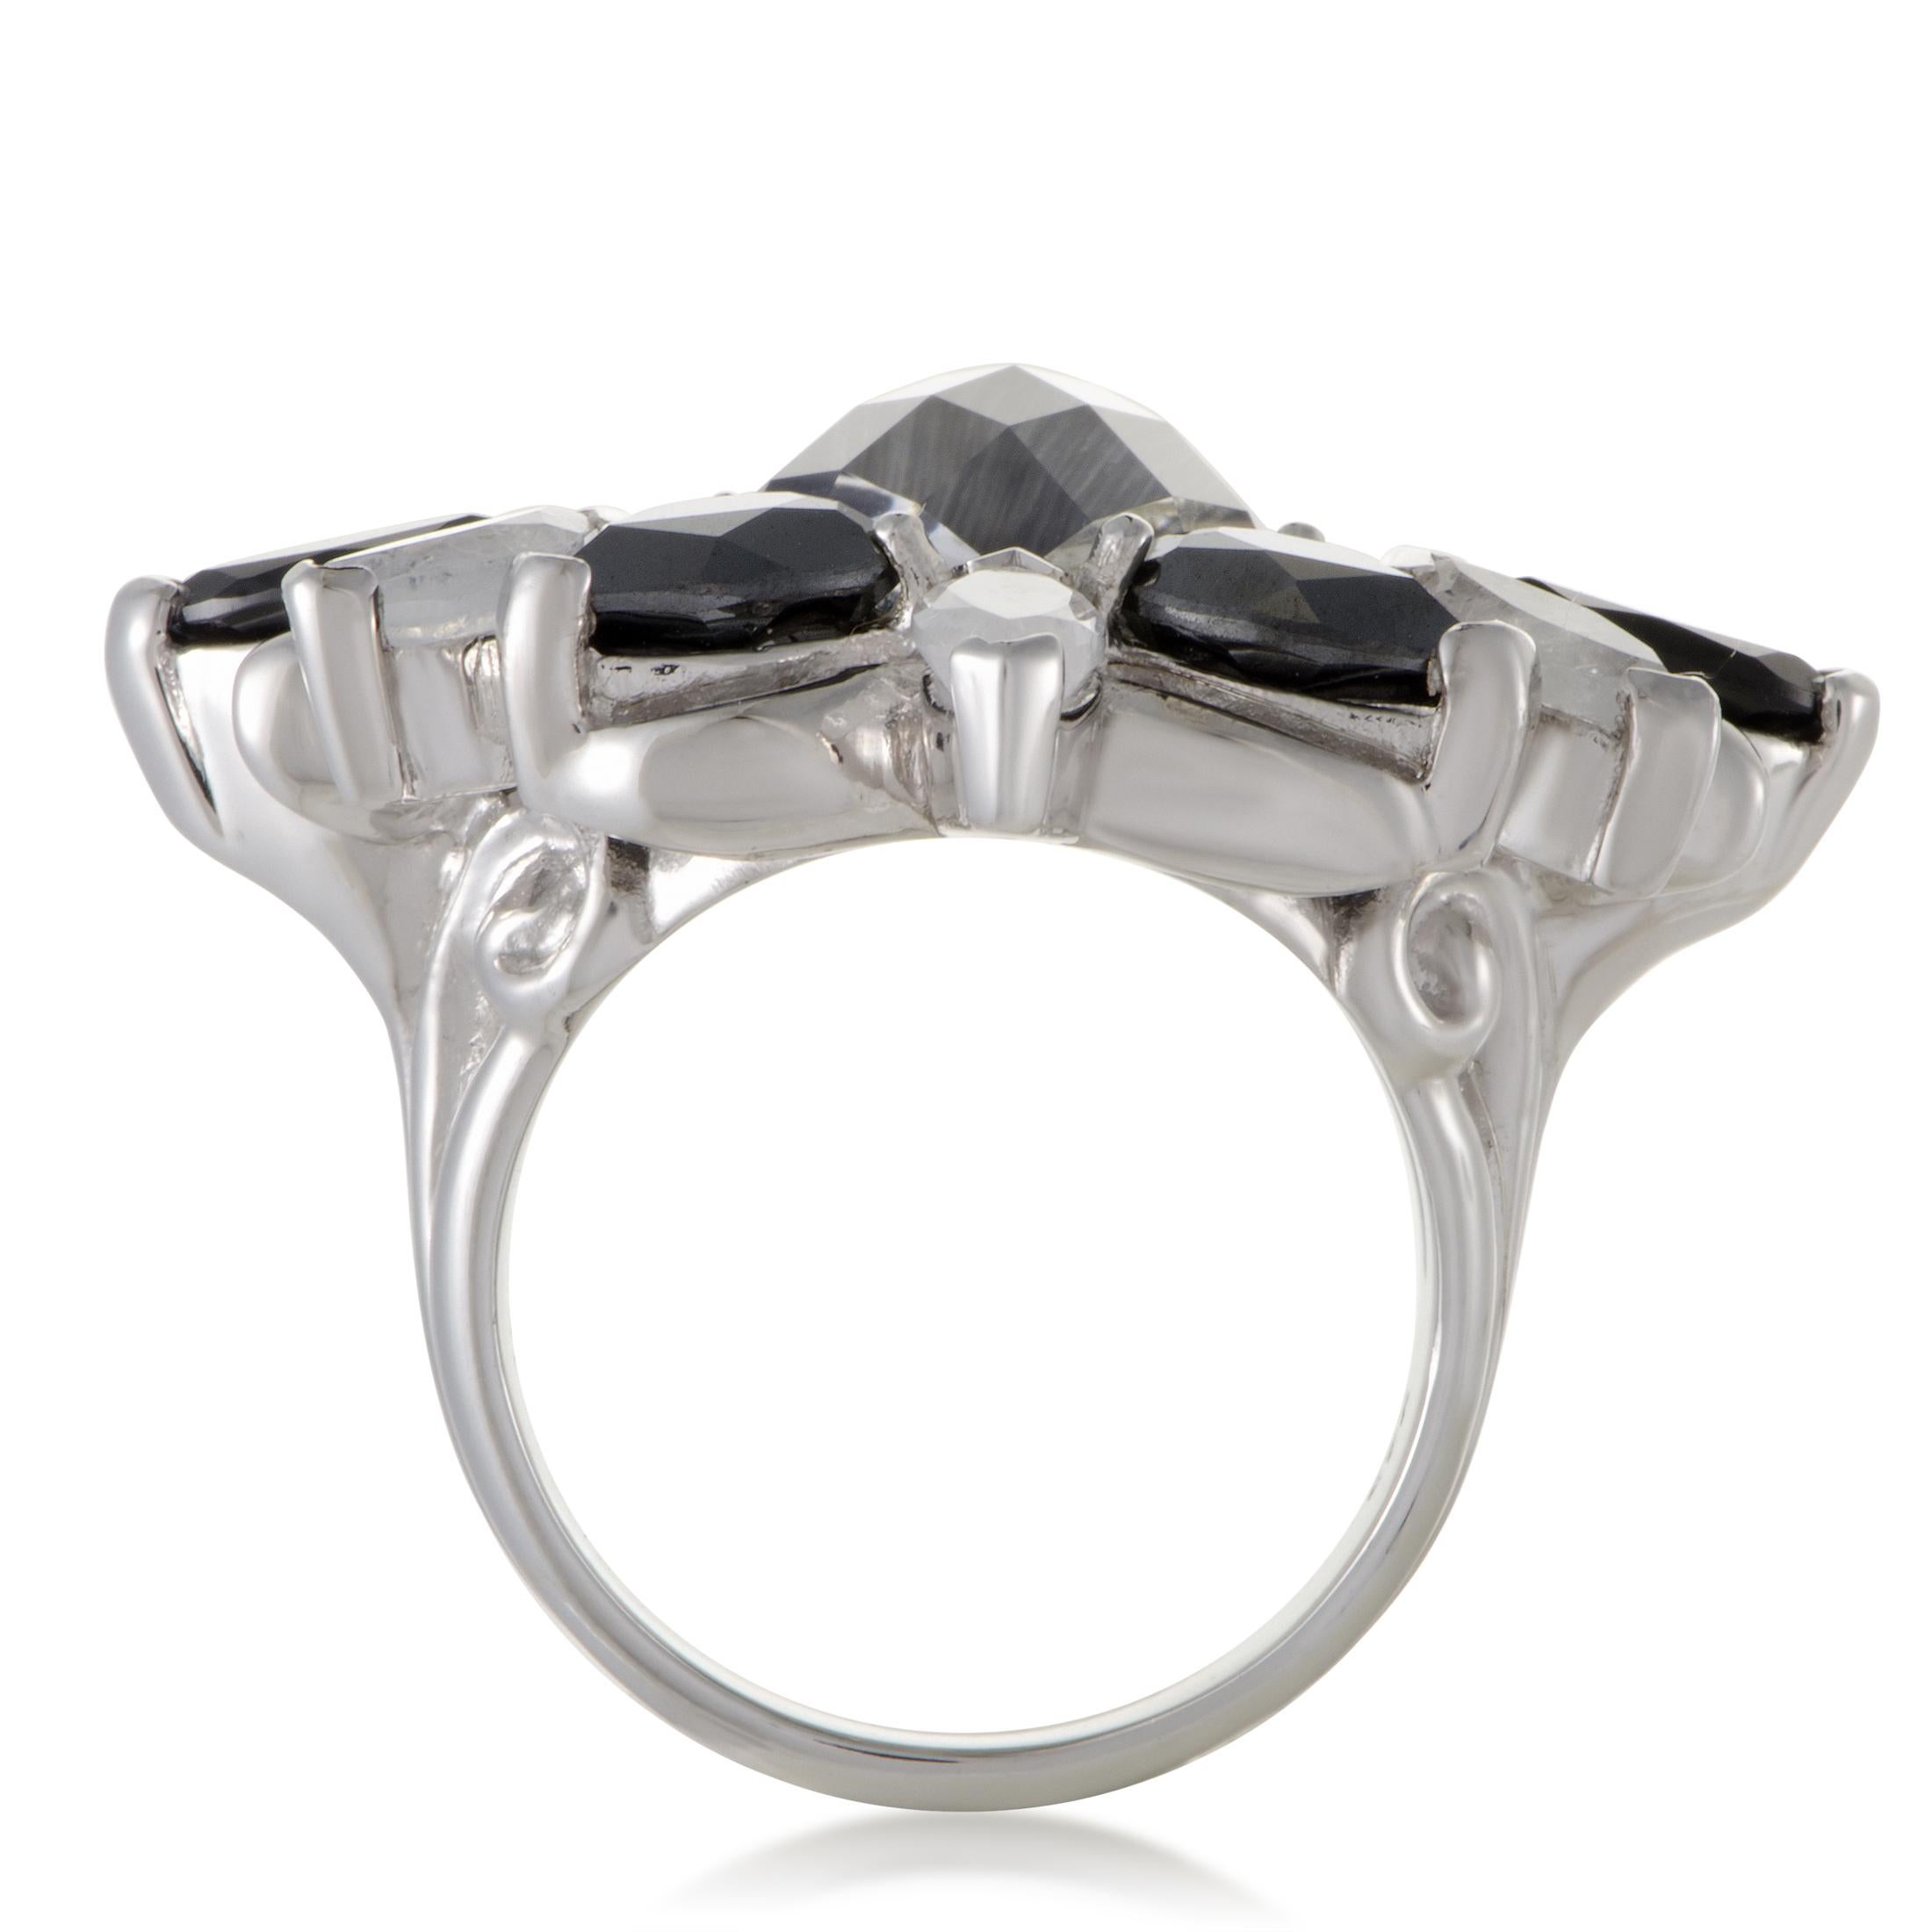 A magnificent blend of splendid quartz, neat cat's eye, stunning hematite stones and 1.28 carats of striking black spinels produce an exceptional sight against the shimmering white rhodium-plated silver in this fascinating ring from Stephen